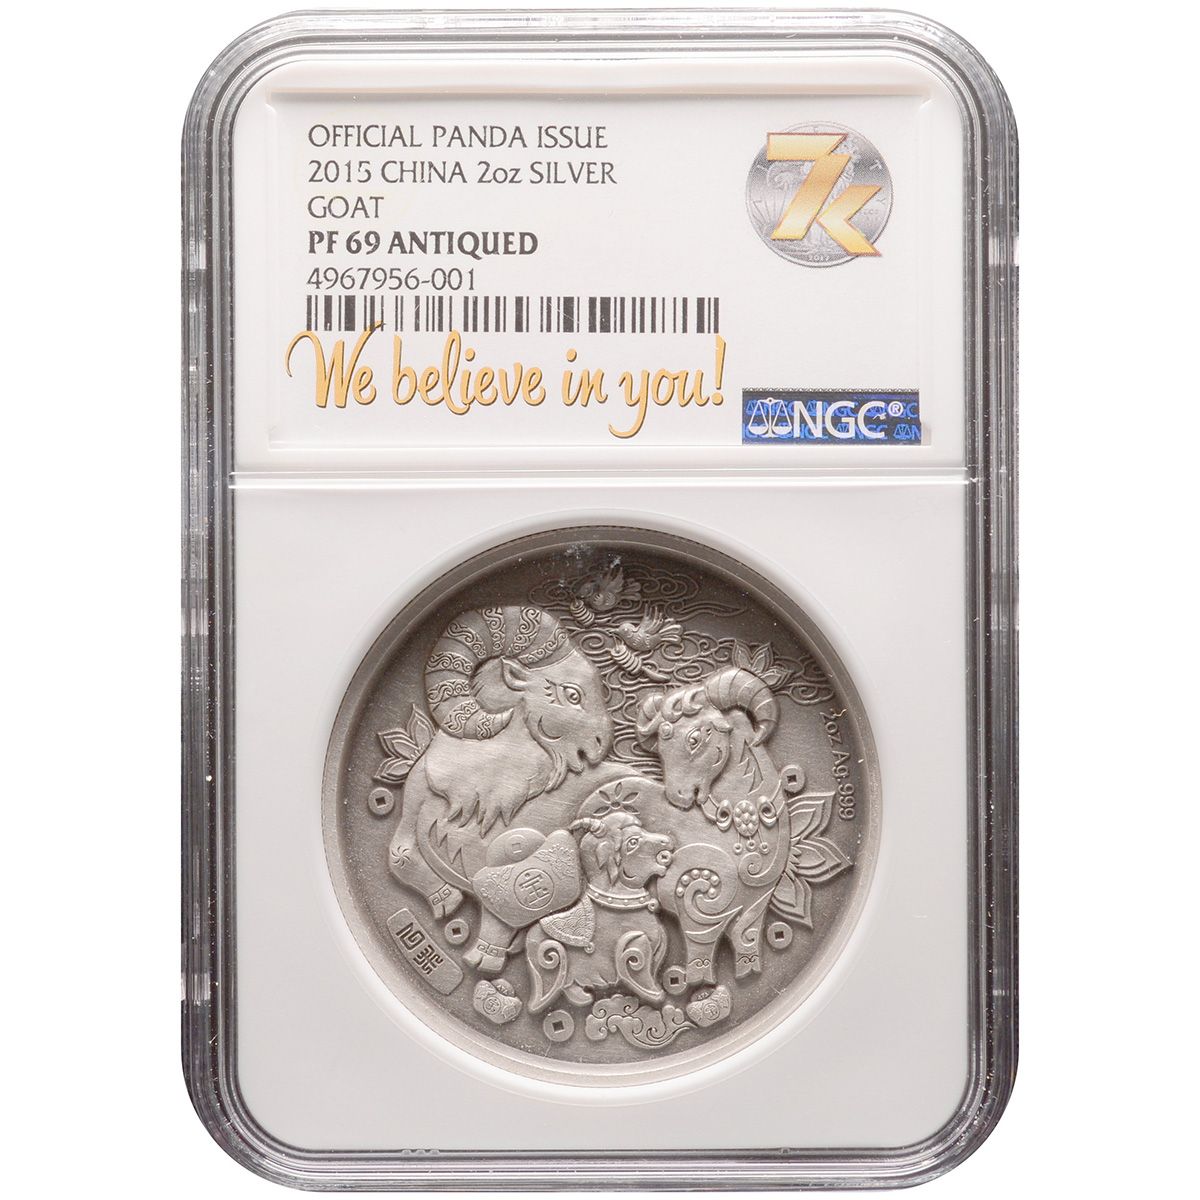 2015 China SILVER GOAT PF 69 Antiqued Silver Coin - OZB